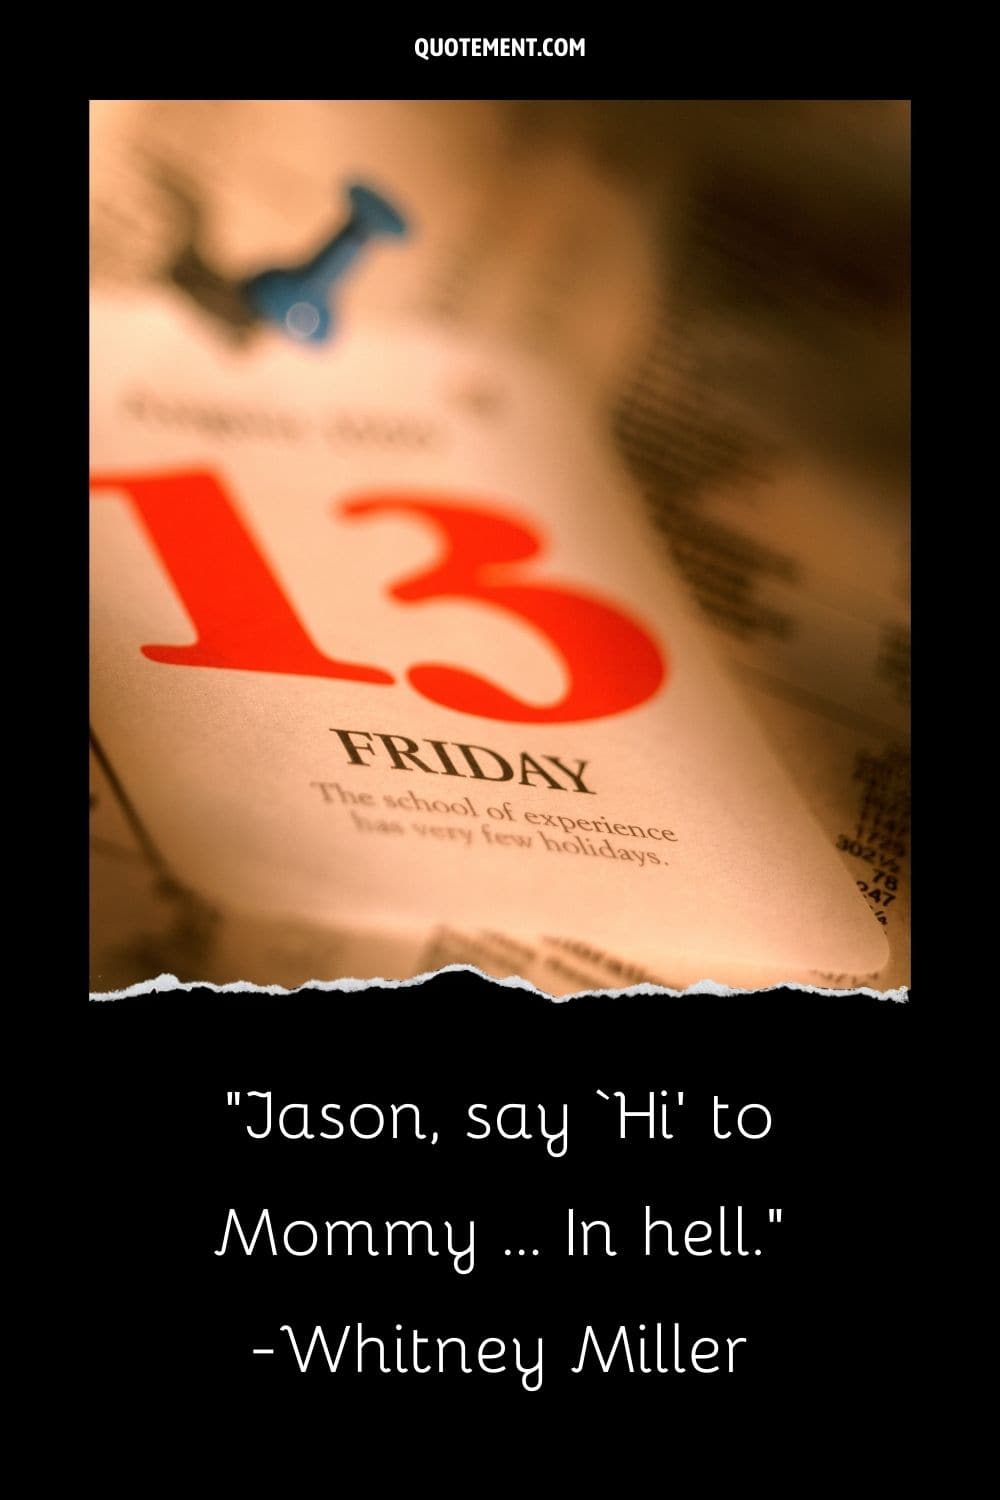 Image of calendar representing the best Friday The 13th quote.